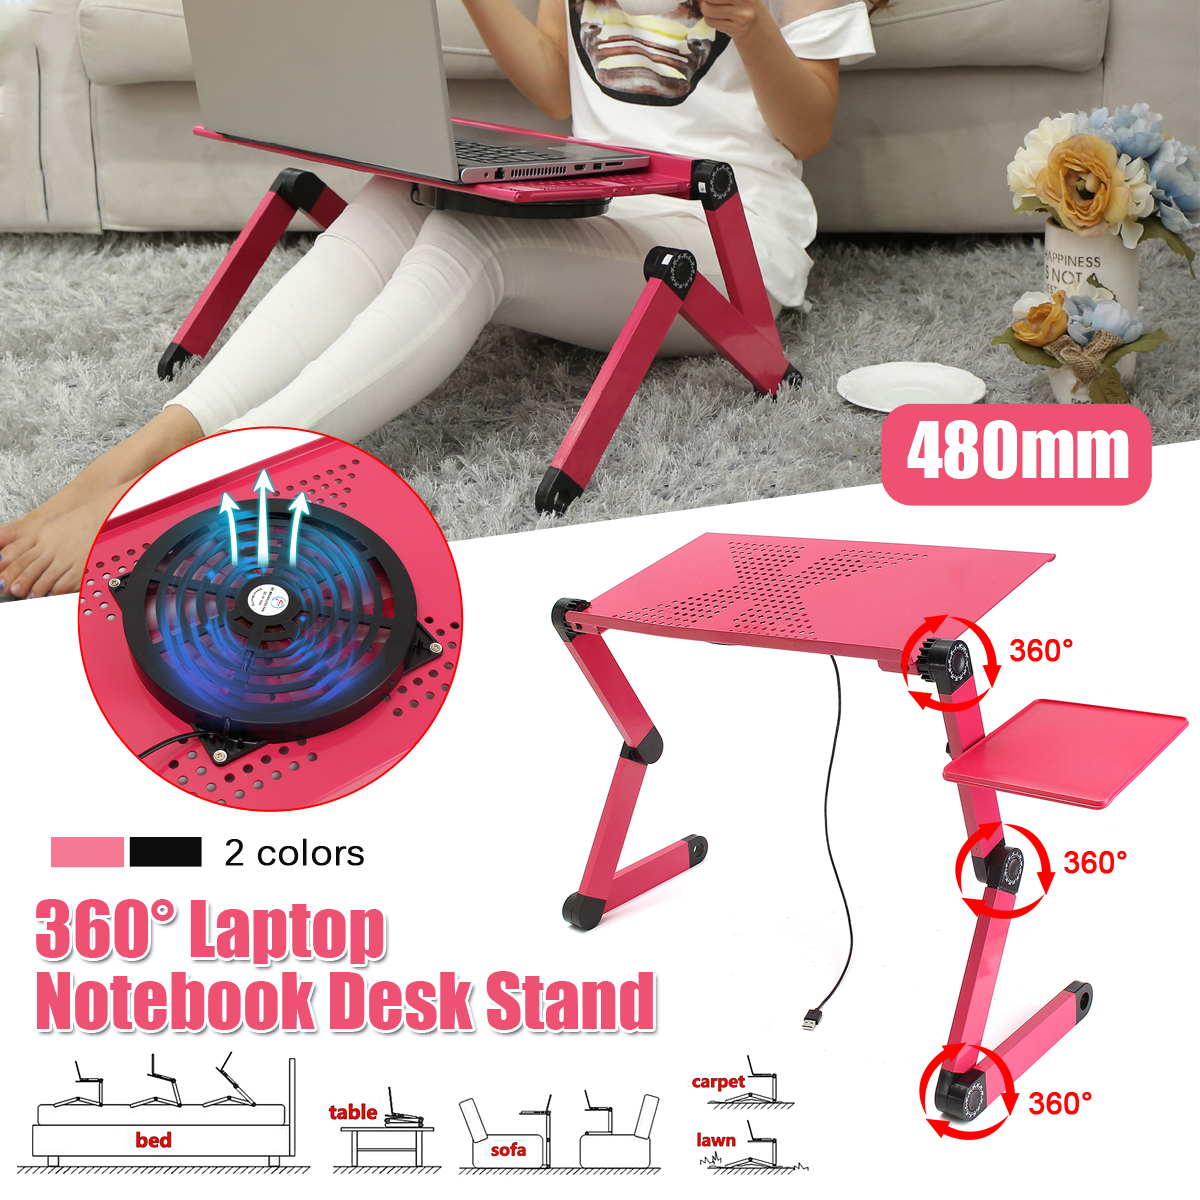 Foldable-Laptop-Table-Stand-Portable-Adjustable-Stand-Bed-Tray-with-Cooling-Fan-and-Mouse-Pad-1121117-1